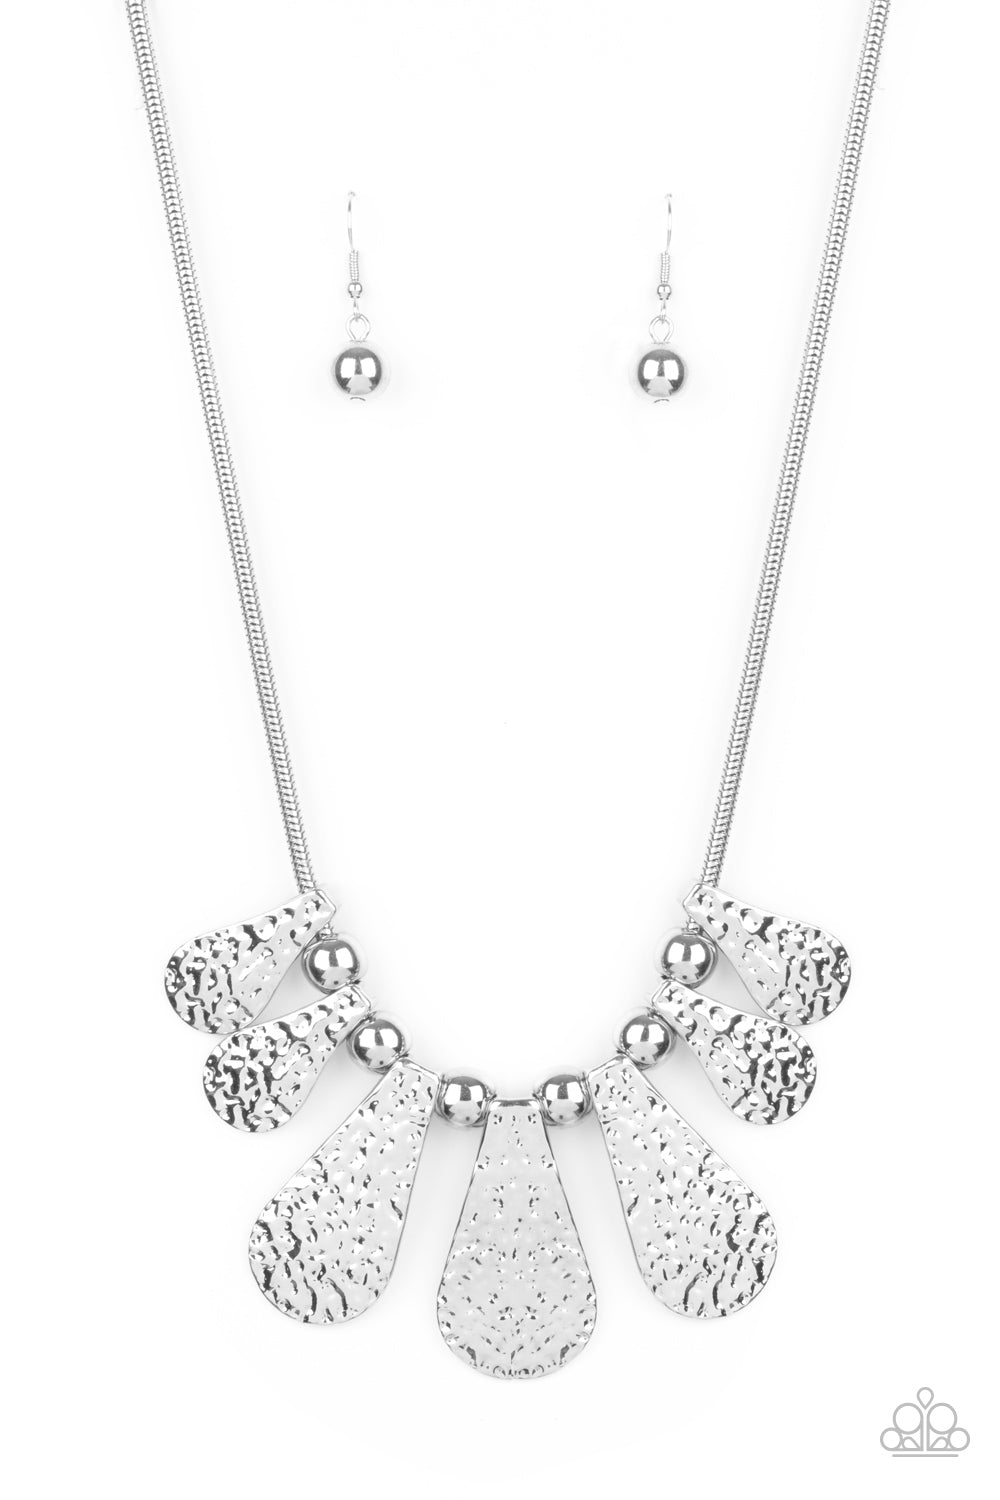 Gallery Goddess Silver Necklace - Paparazzi Accessories